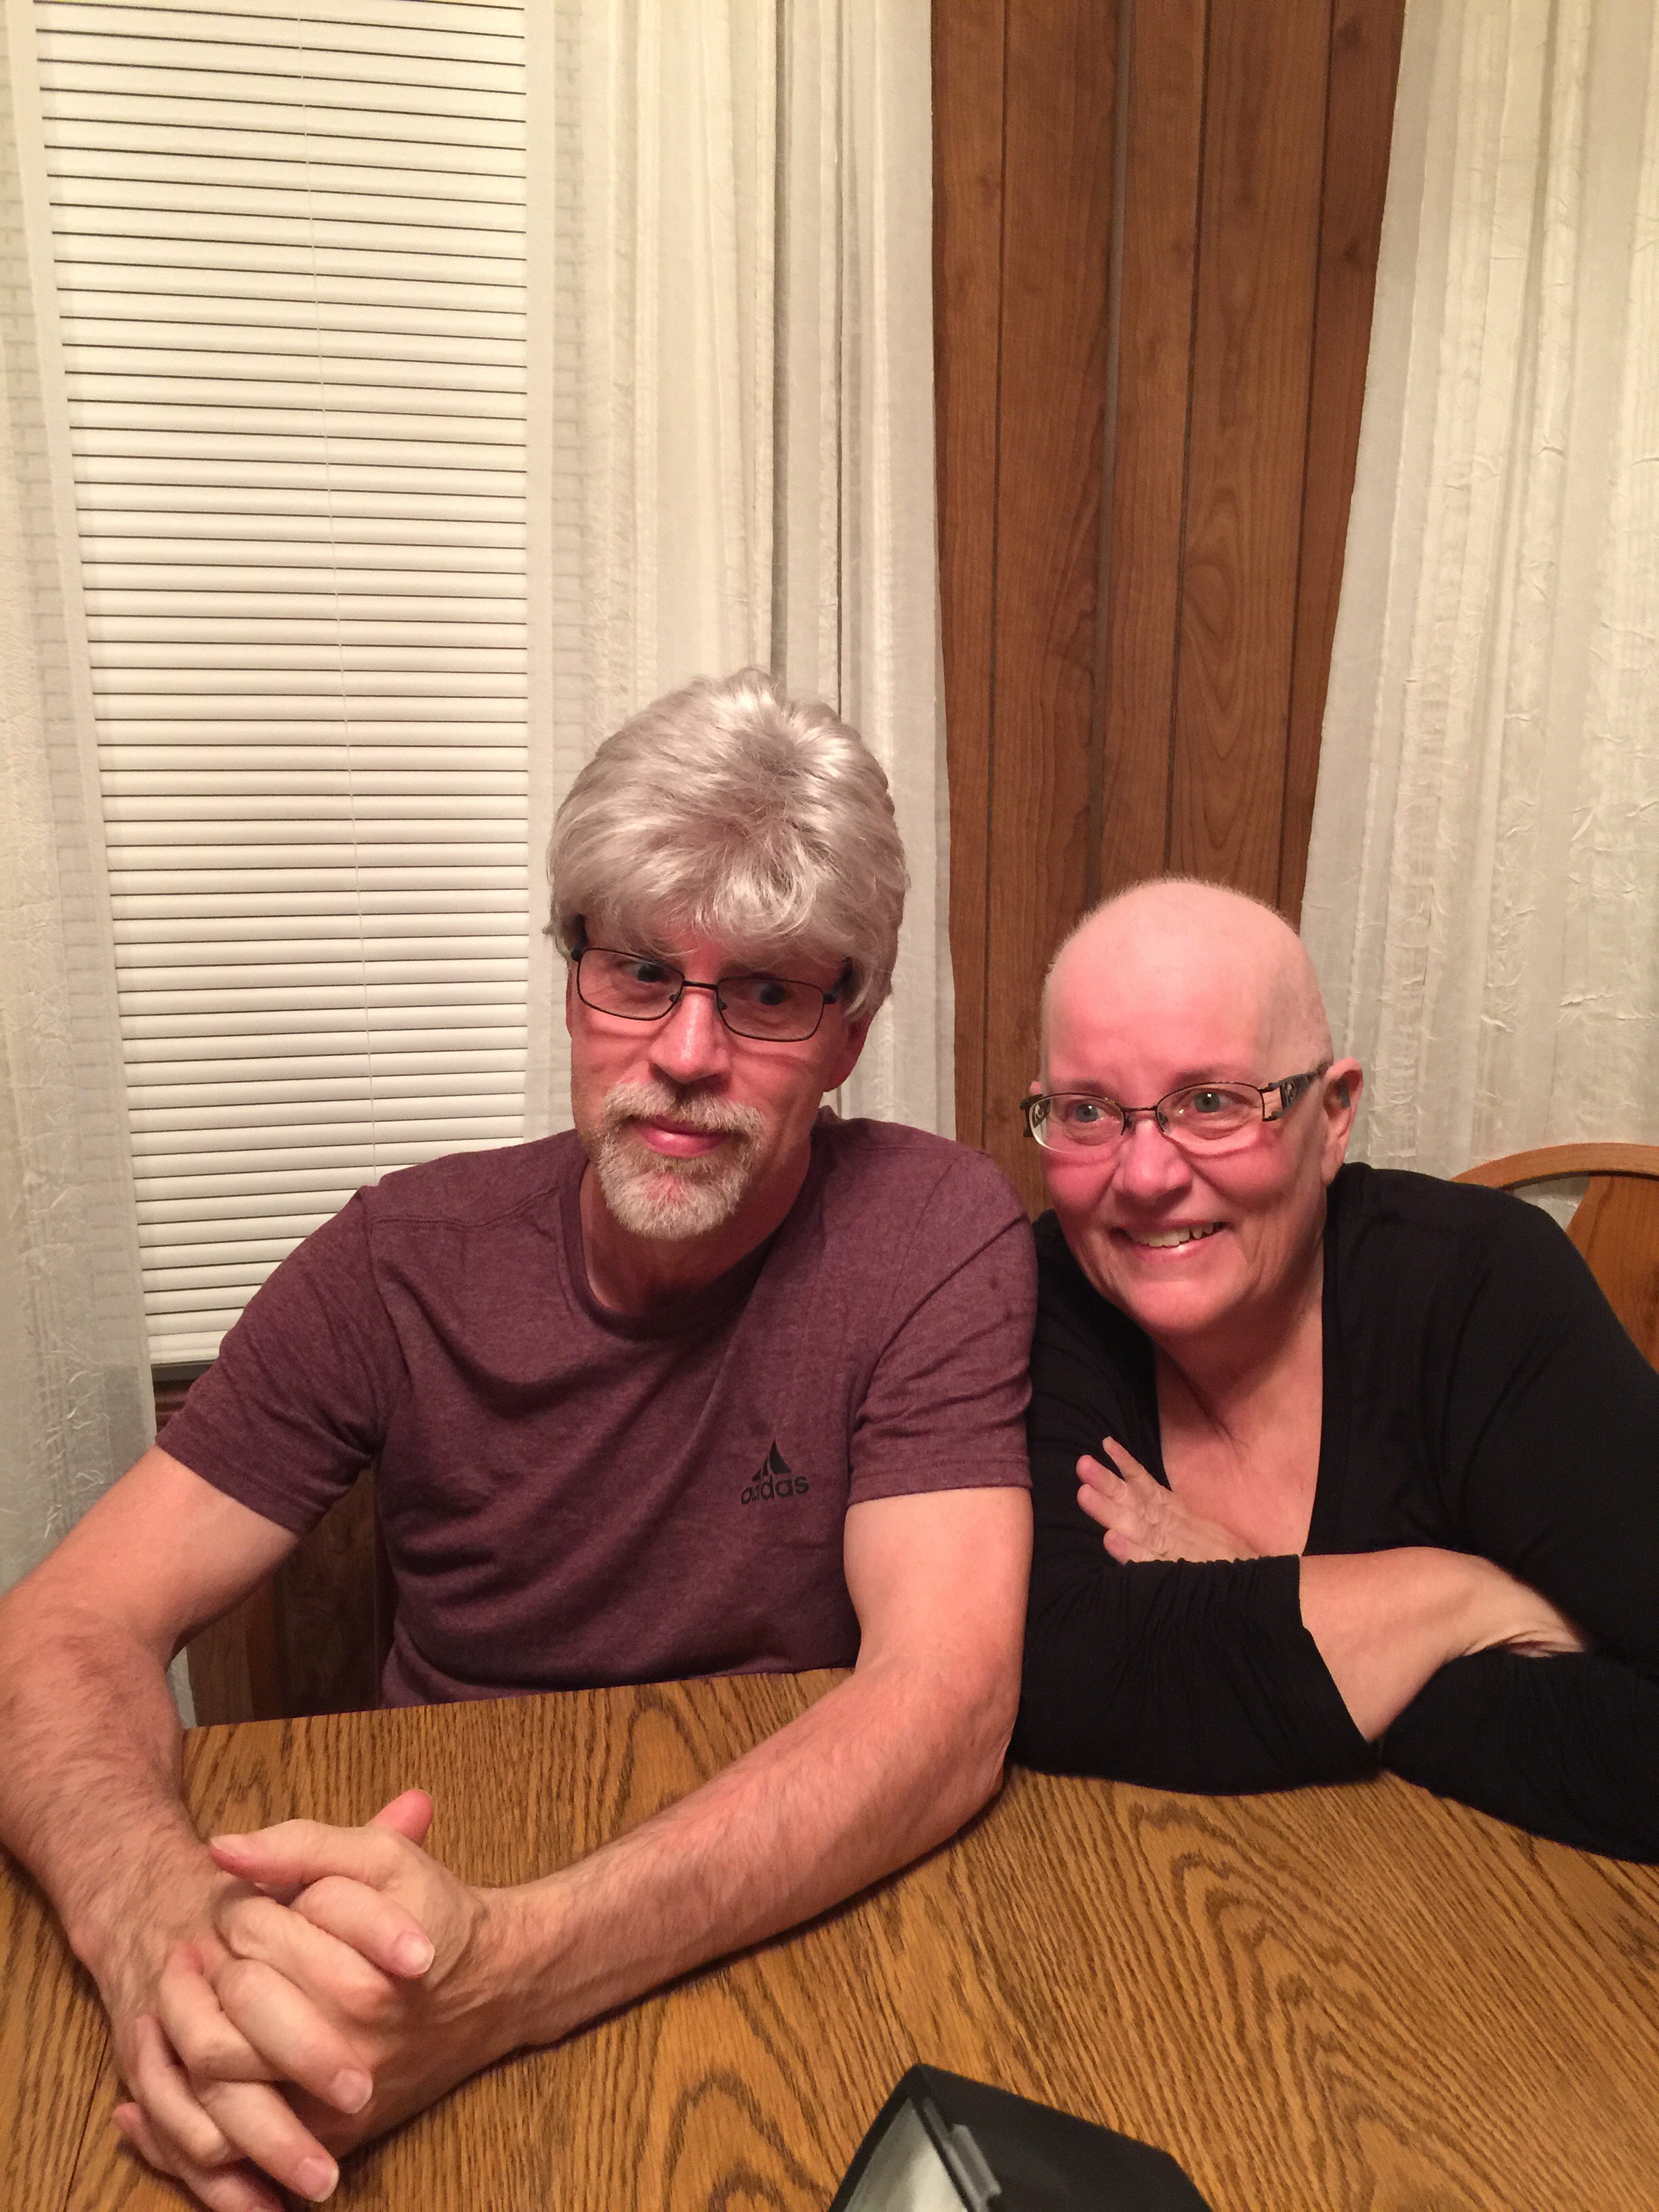 Dennis with his sister shortly after her diagnosis